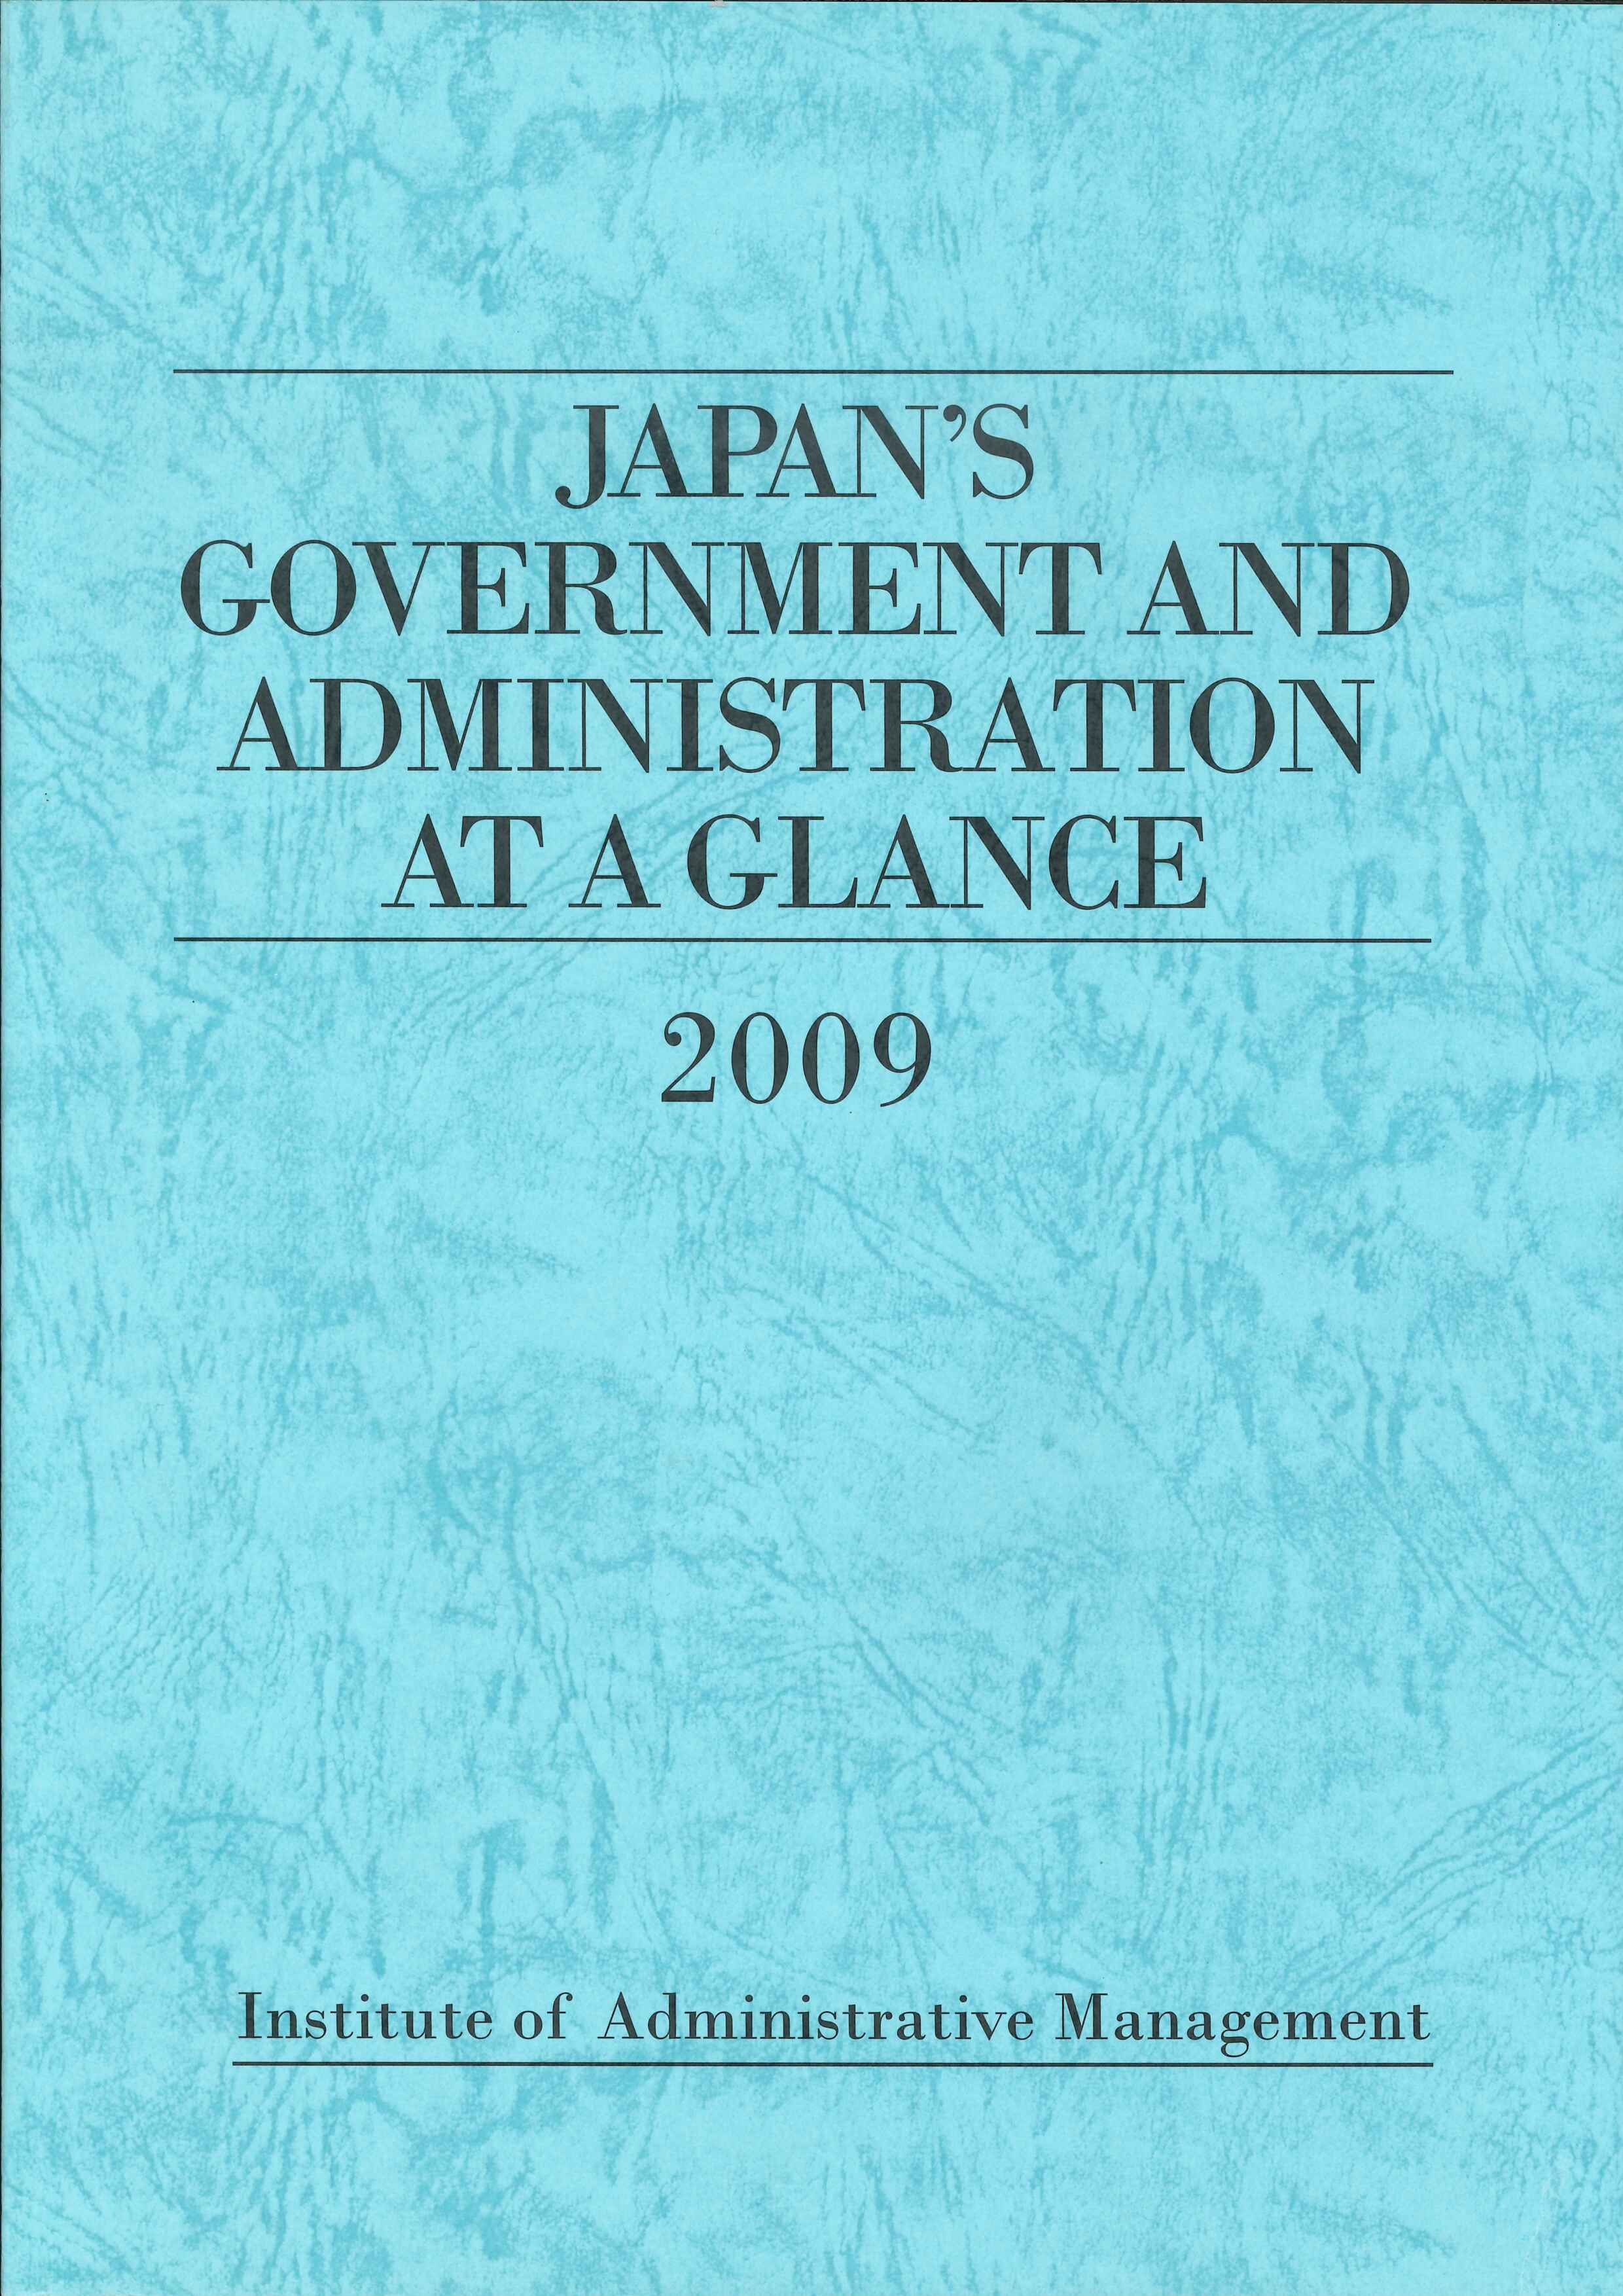 [JAPAN'S GOVERNMENT AND ADMINISTRATION AT A GLANCE]